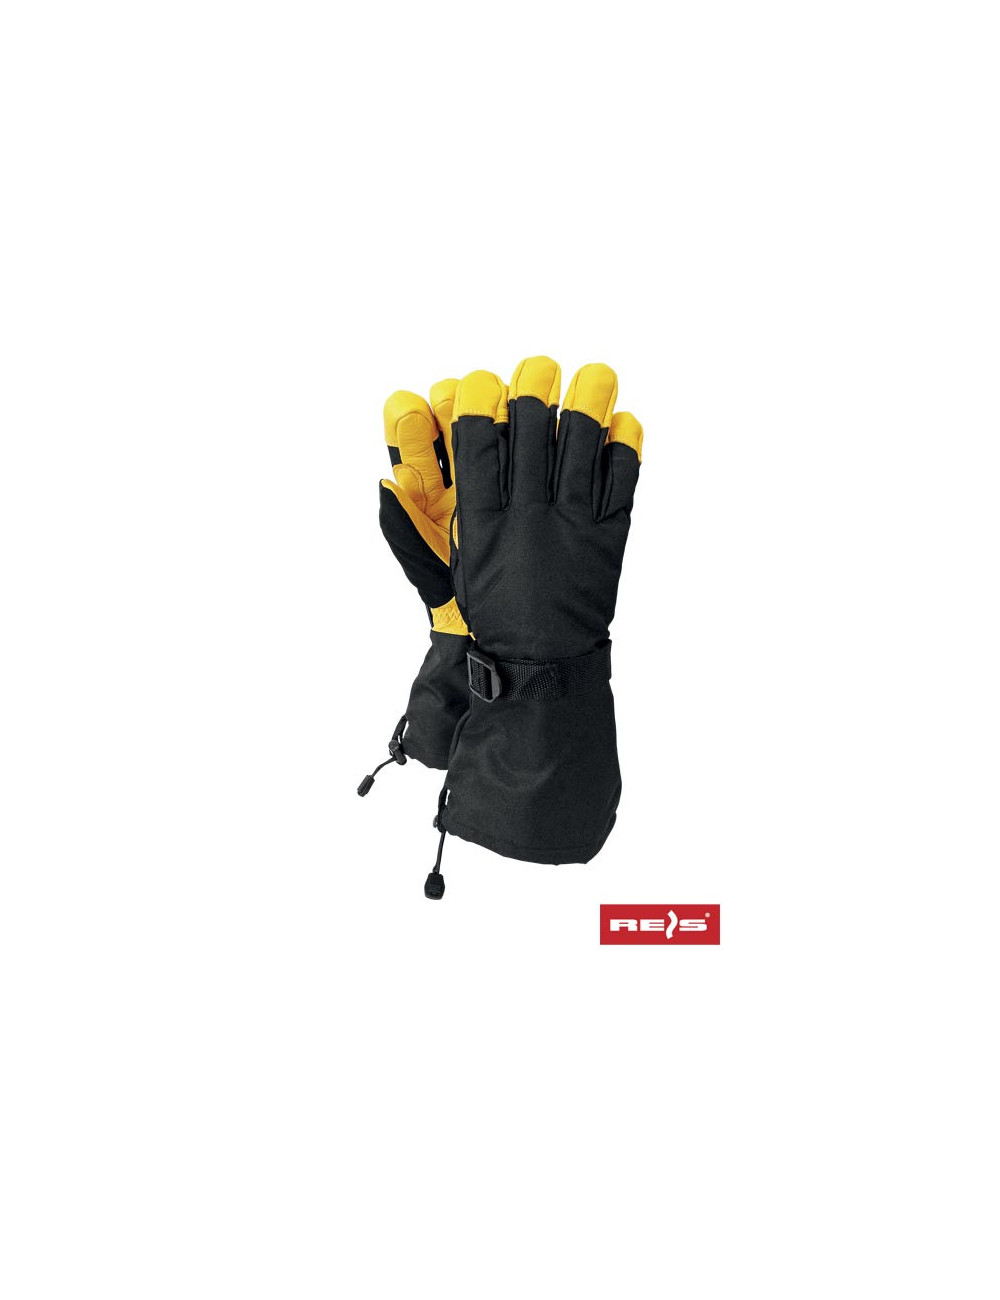 Protective gloves rnorwing by black-yellow Reis